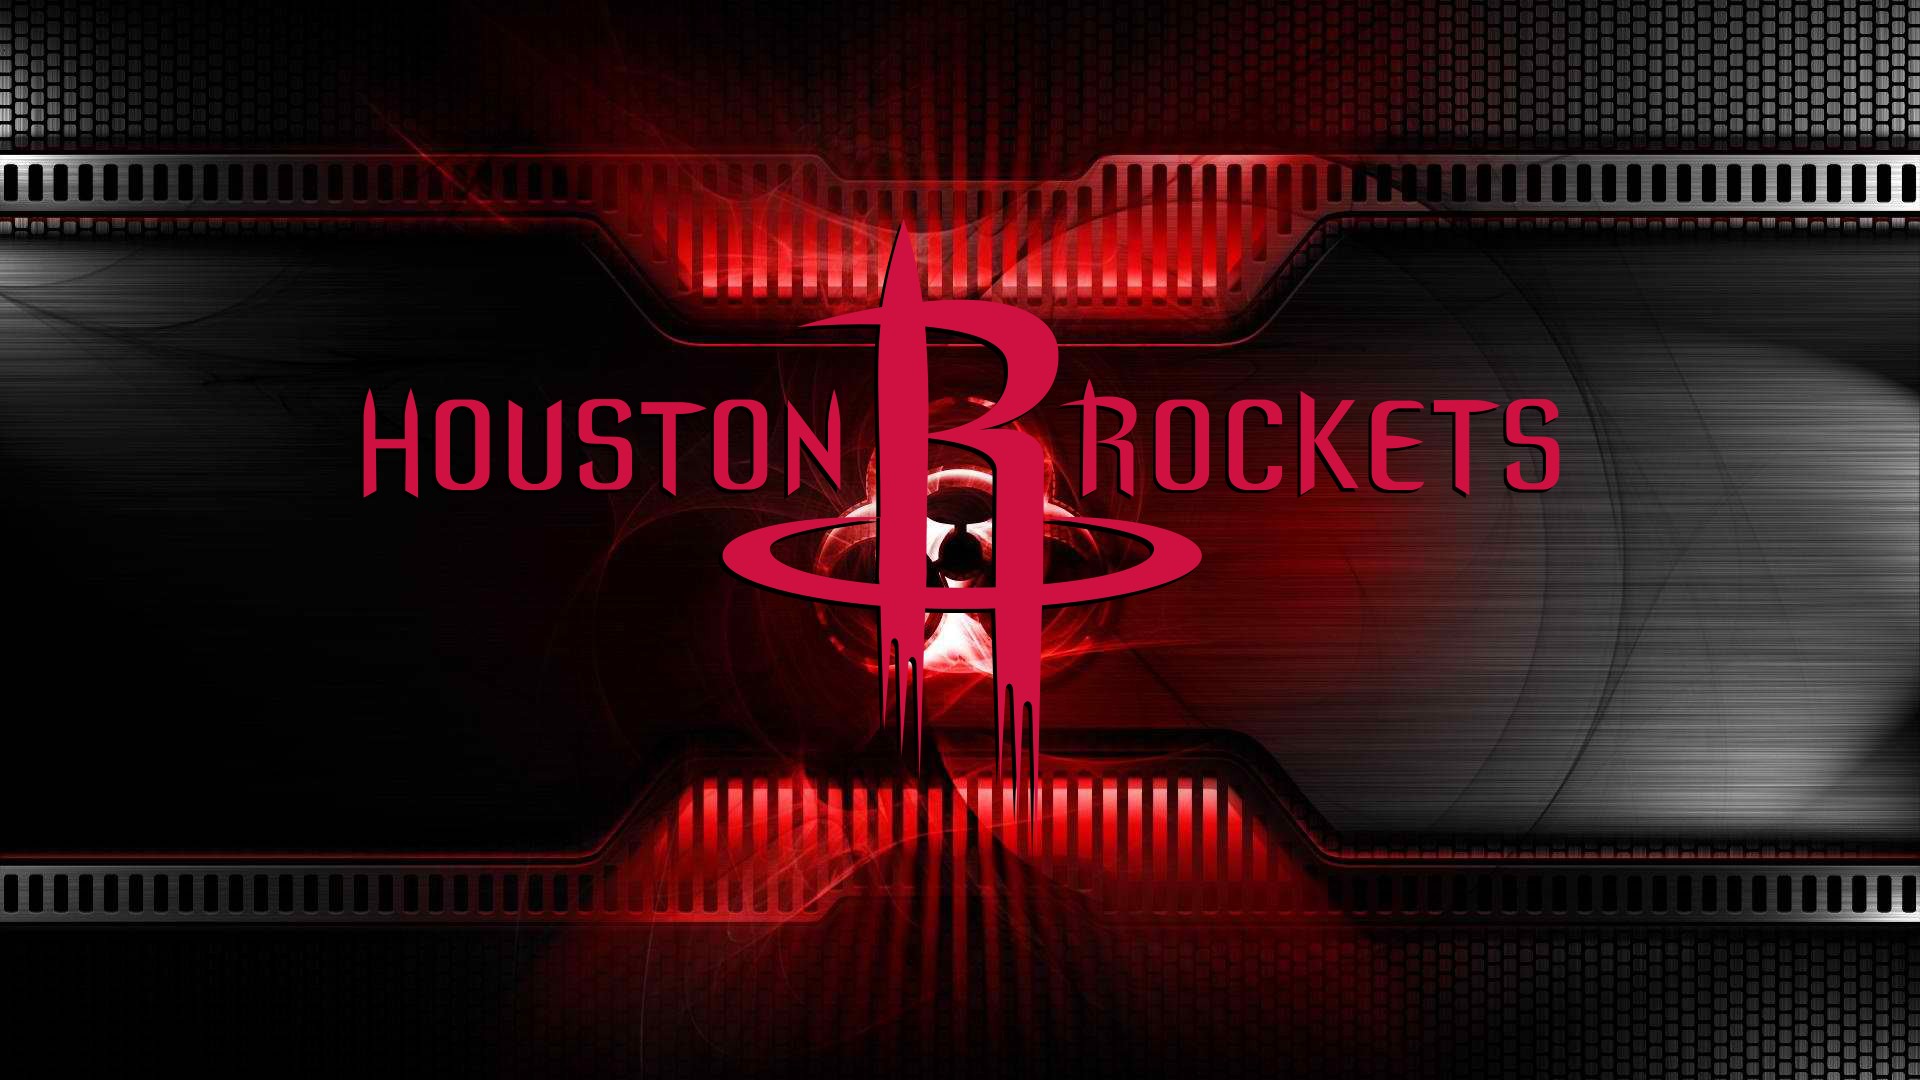 Houston Basketball For Mac Wallpaper with image dimensions 1920x1080 pixel. You can make this wallpaper for your Desktop Computer Backgrounds, Windows or Mac Screensavers, iPhone Lock screen, Tablet or Android and another Mobile Phone device